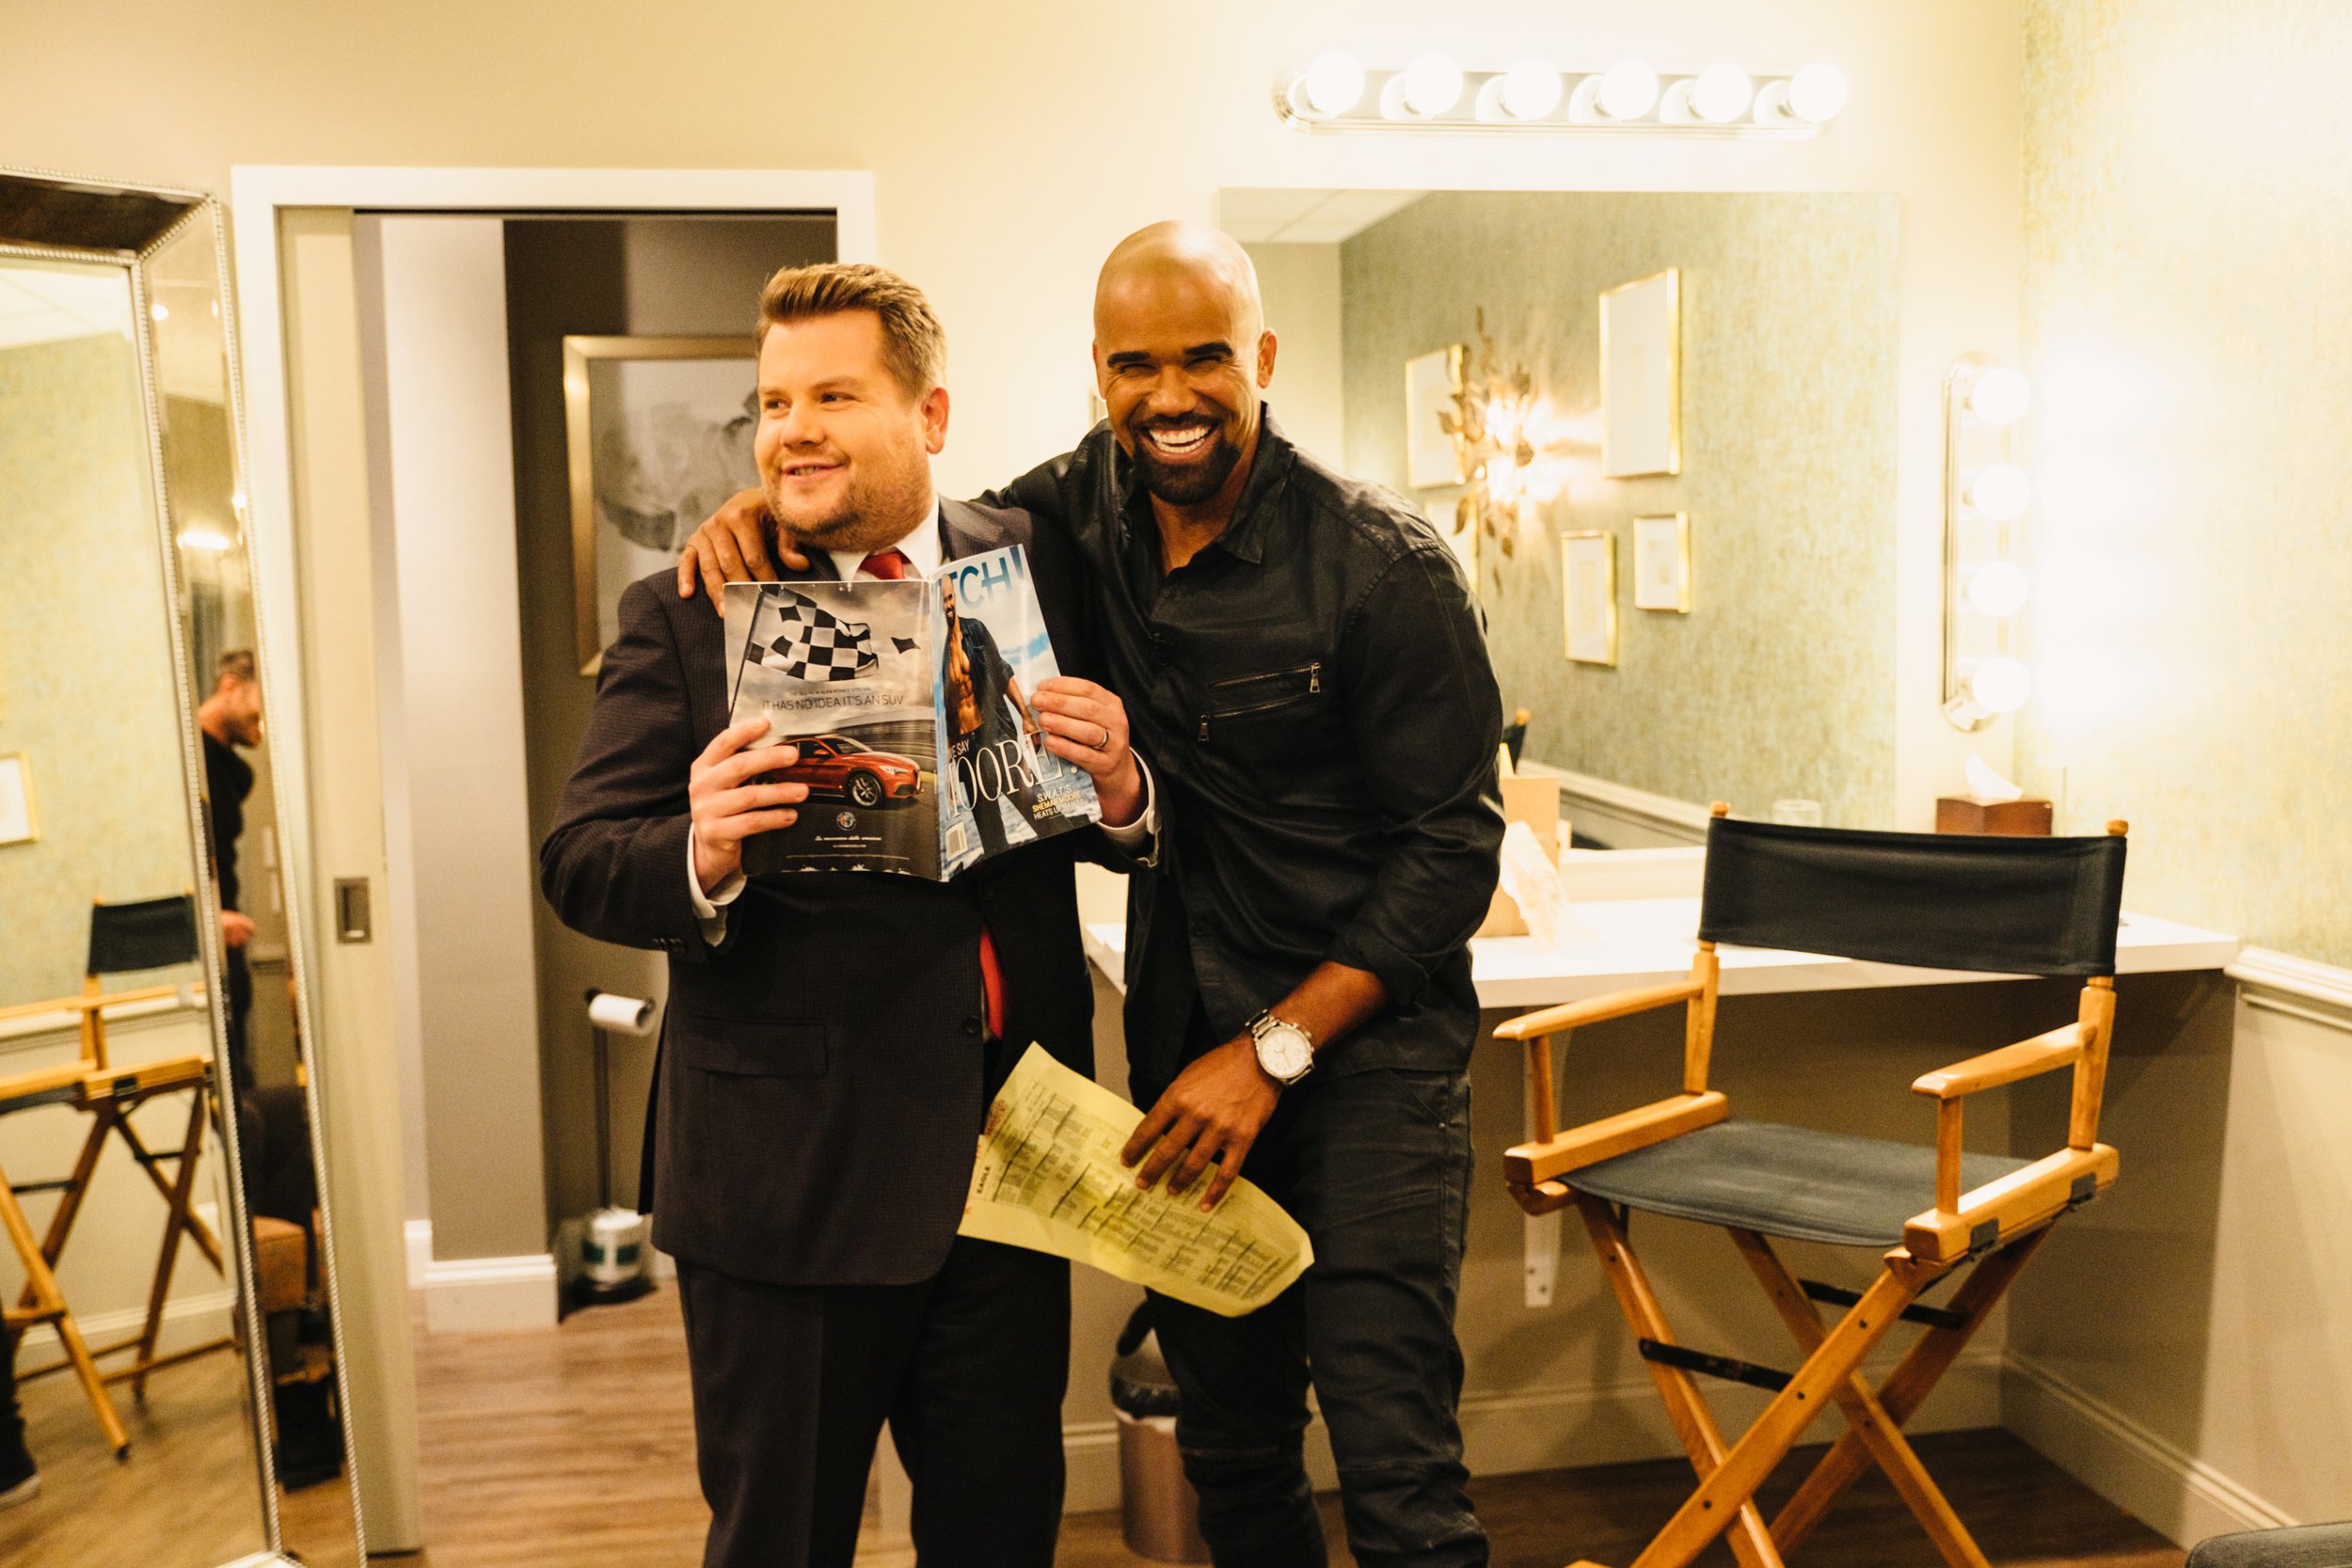  Moore chats in the green room with James Corden during  The Late Late Show with James Corden  ( photo: Terence Patrick ©2017 CBS Broadcasting, Inc. All rights reserved ).  